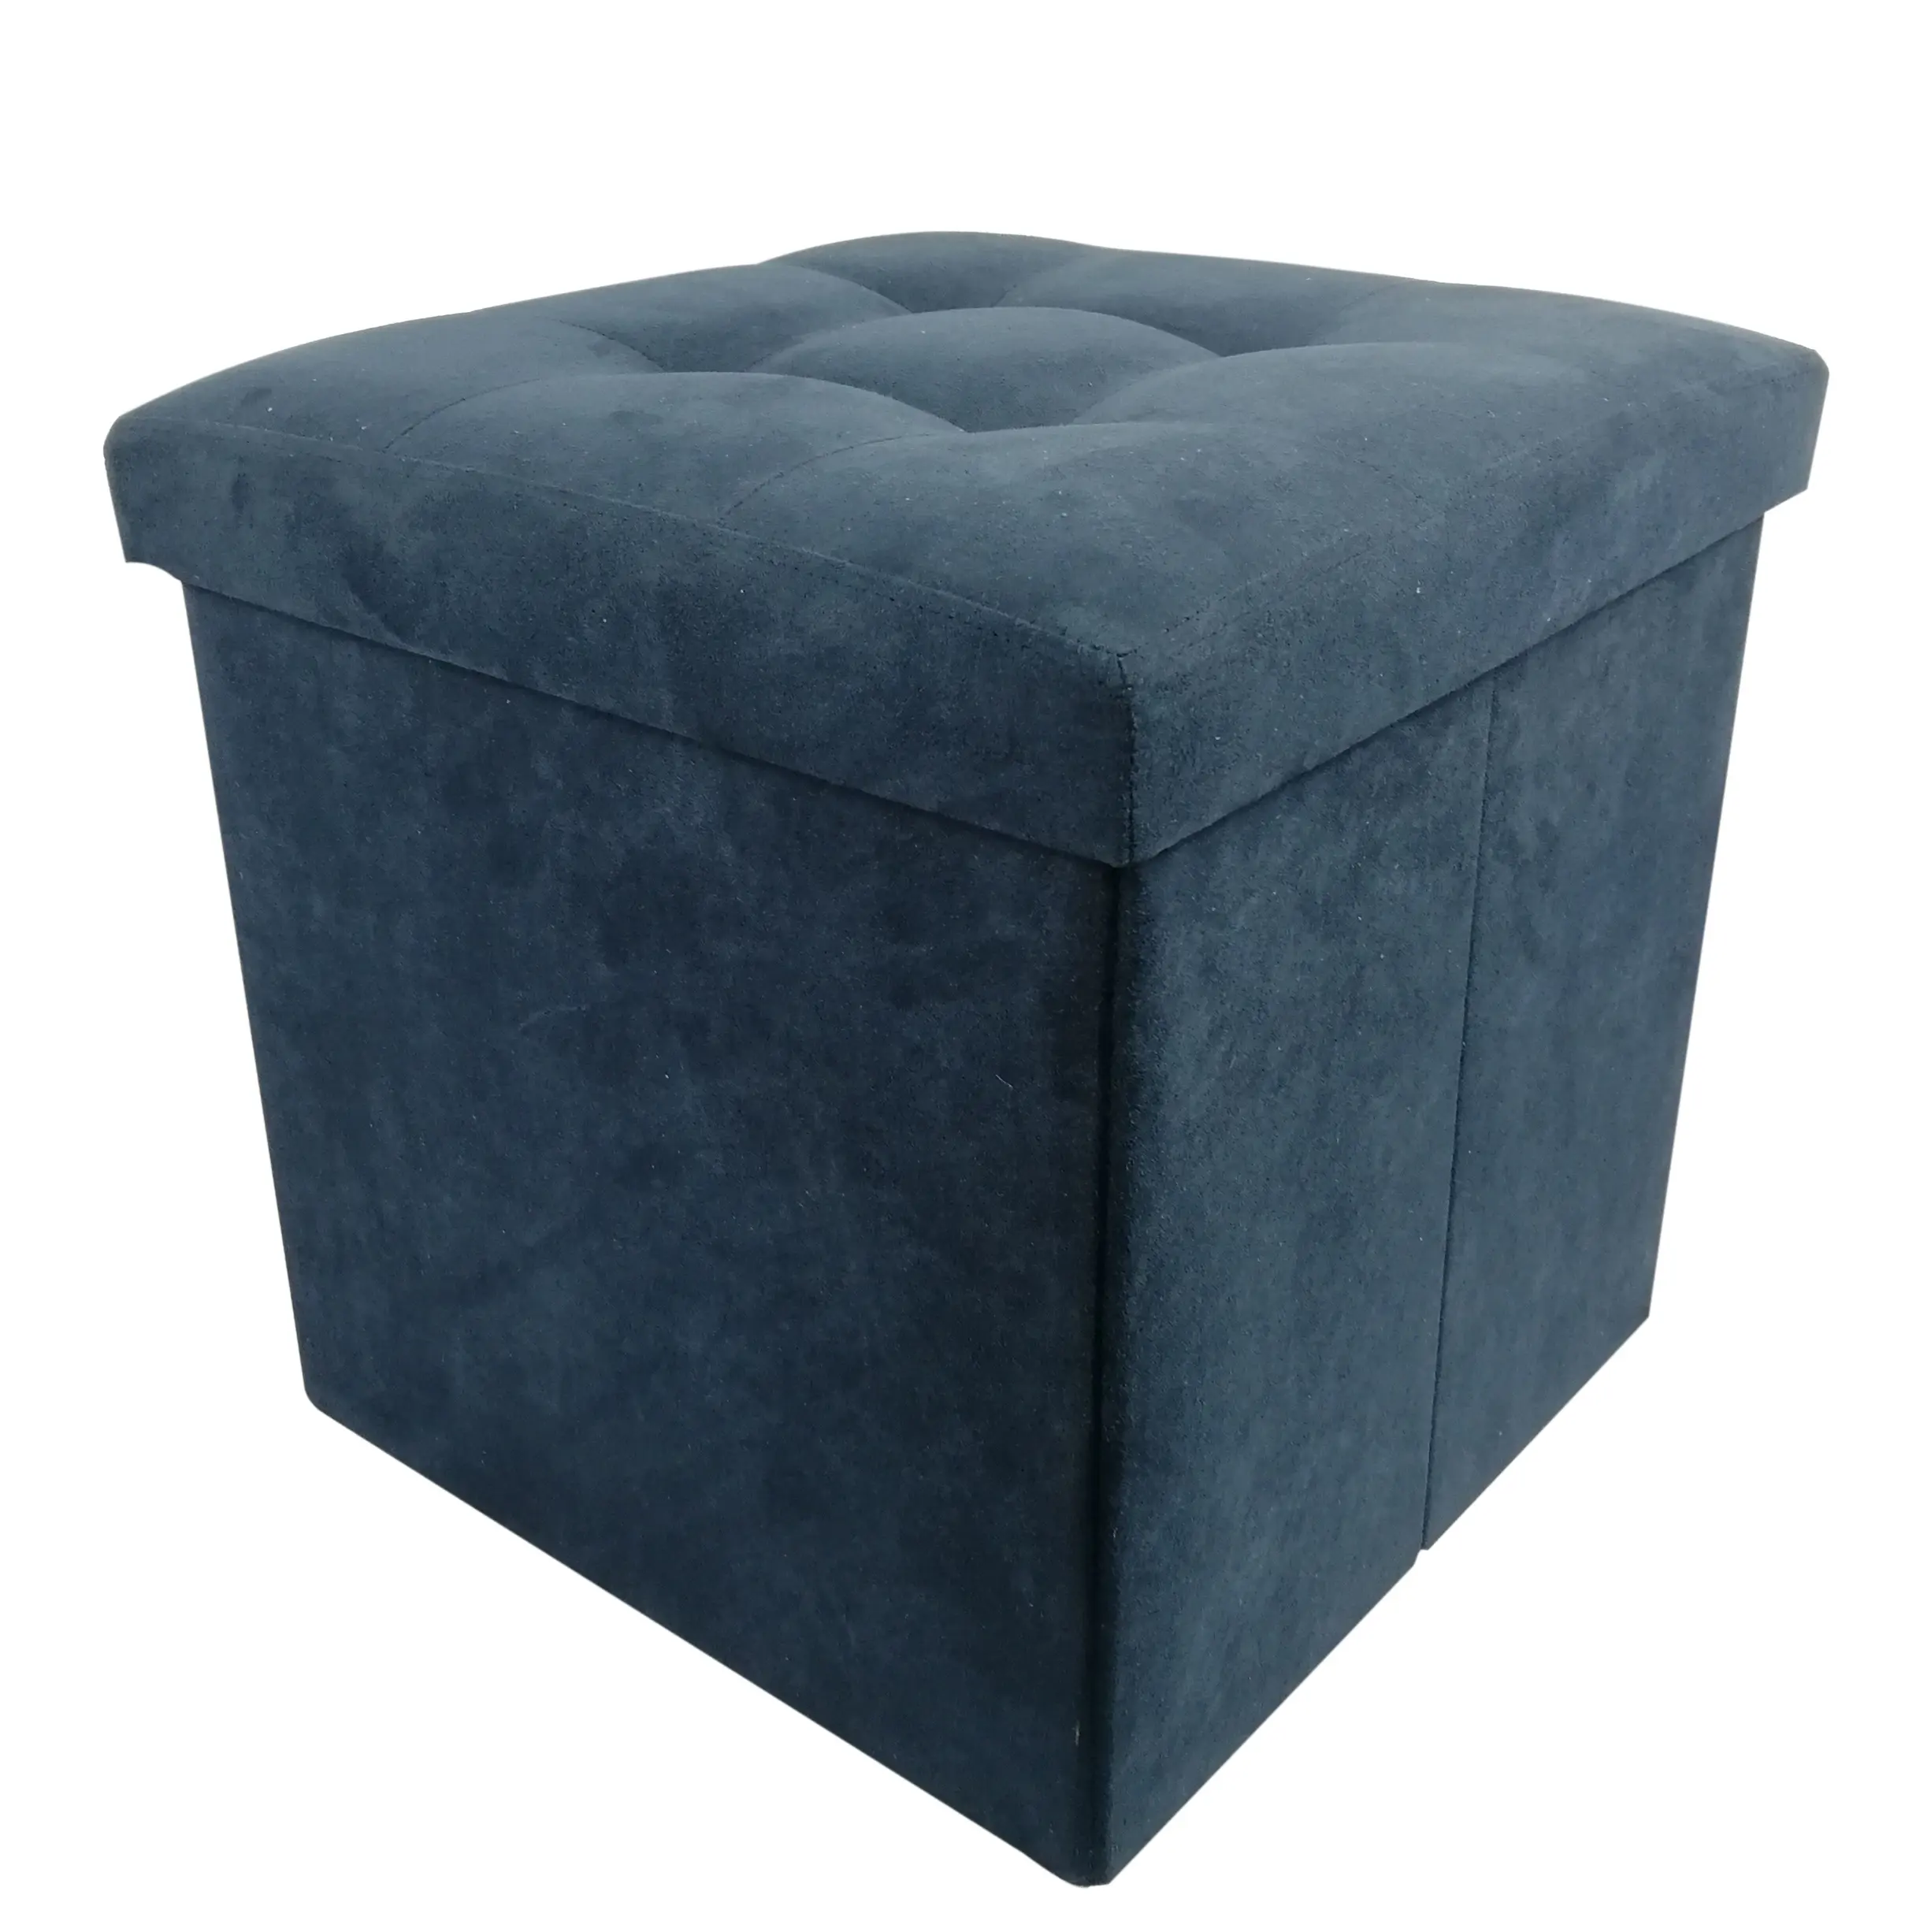 Modern Design Base Storage Ottoman Bench Suede Bedroom Upholstered Bench Customized Living Fabric Packing Room Modern